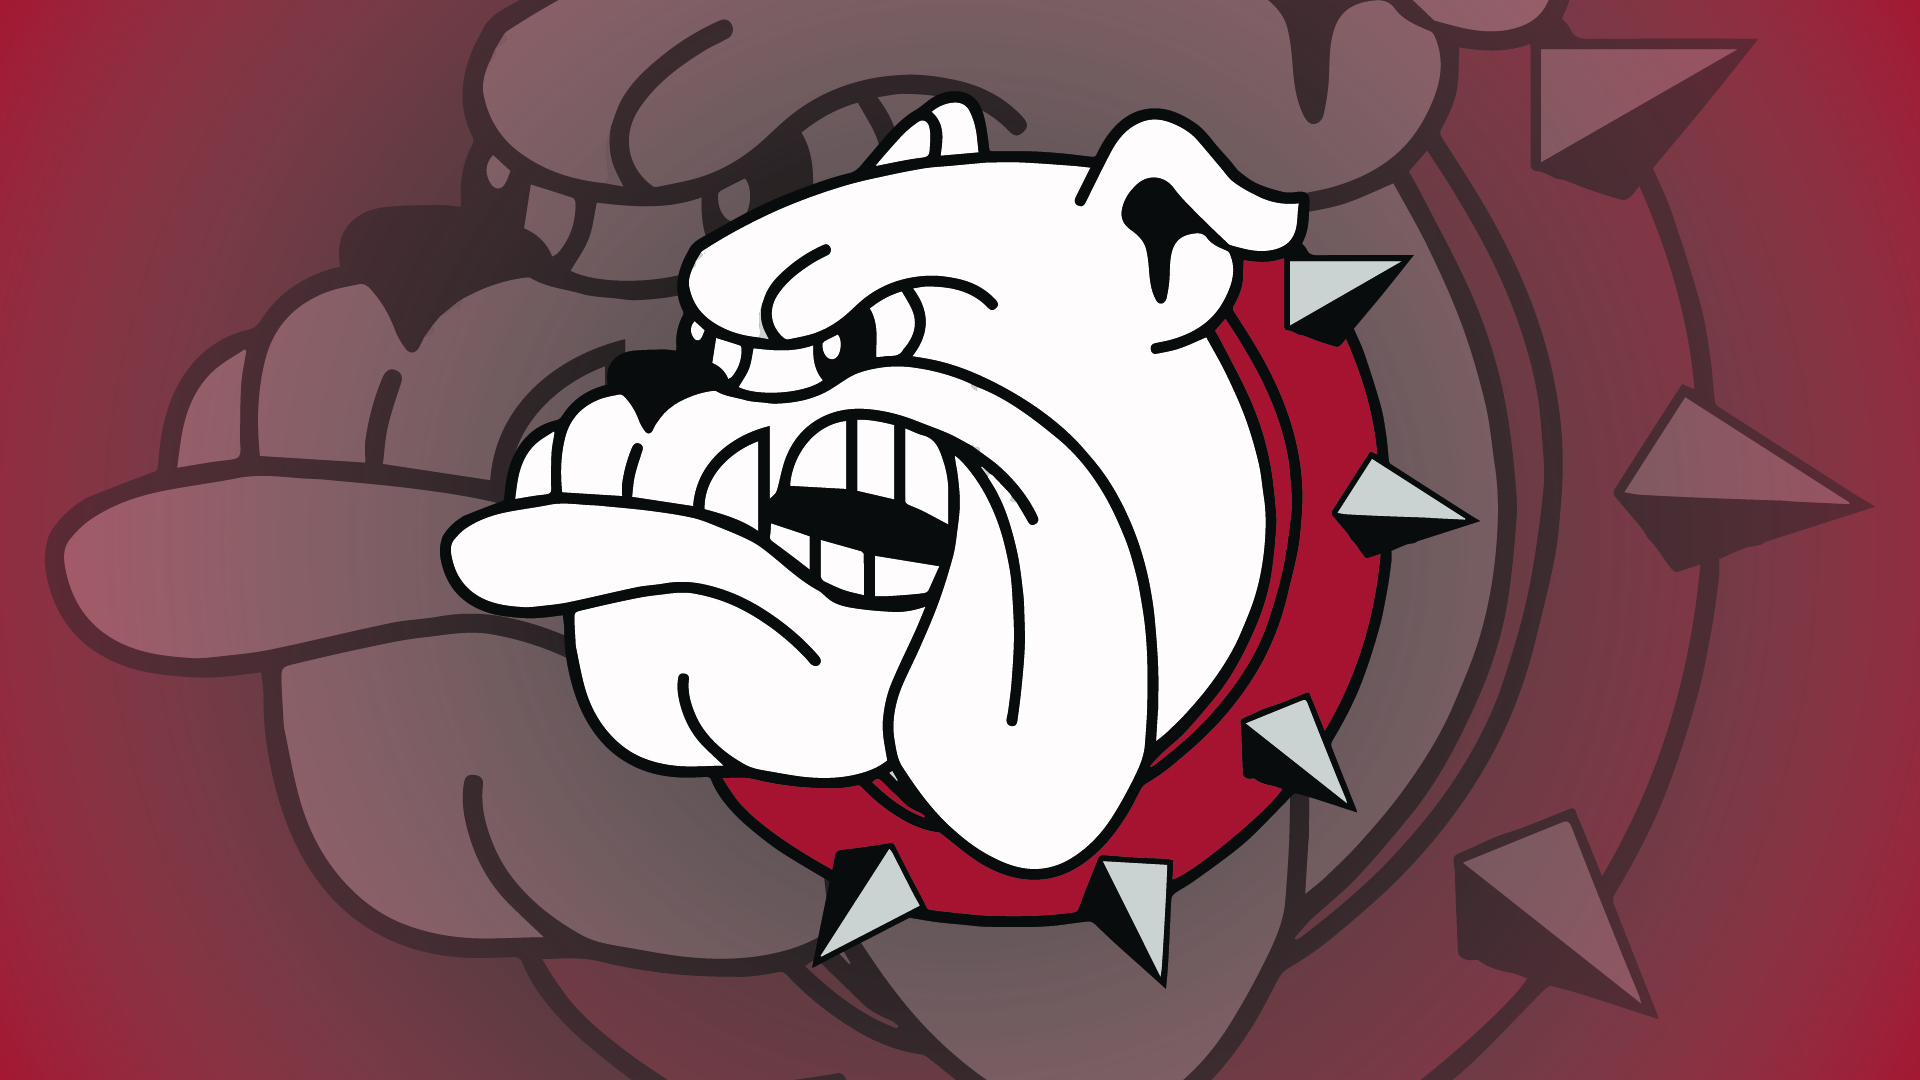 Bruno the Bulldog Center with a second image of the bulldog 2x the size behind on a maroon background. 